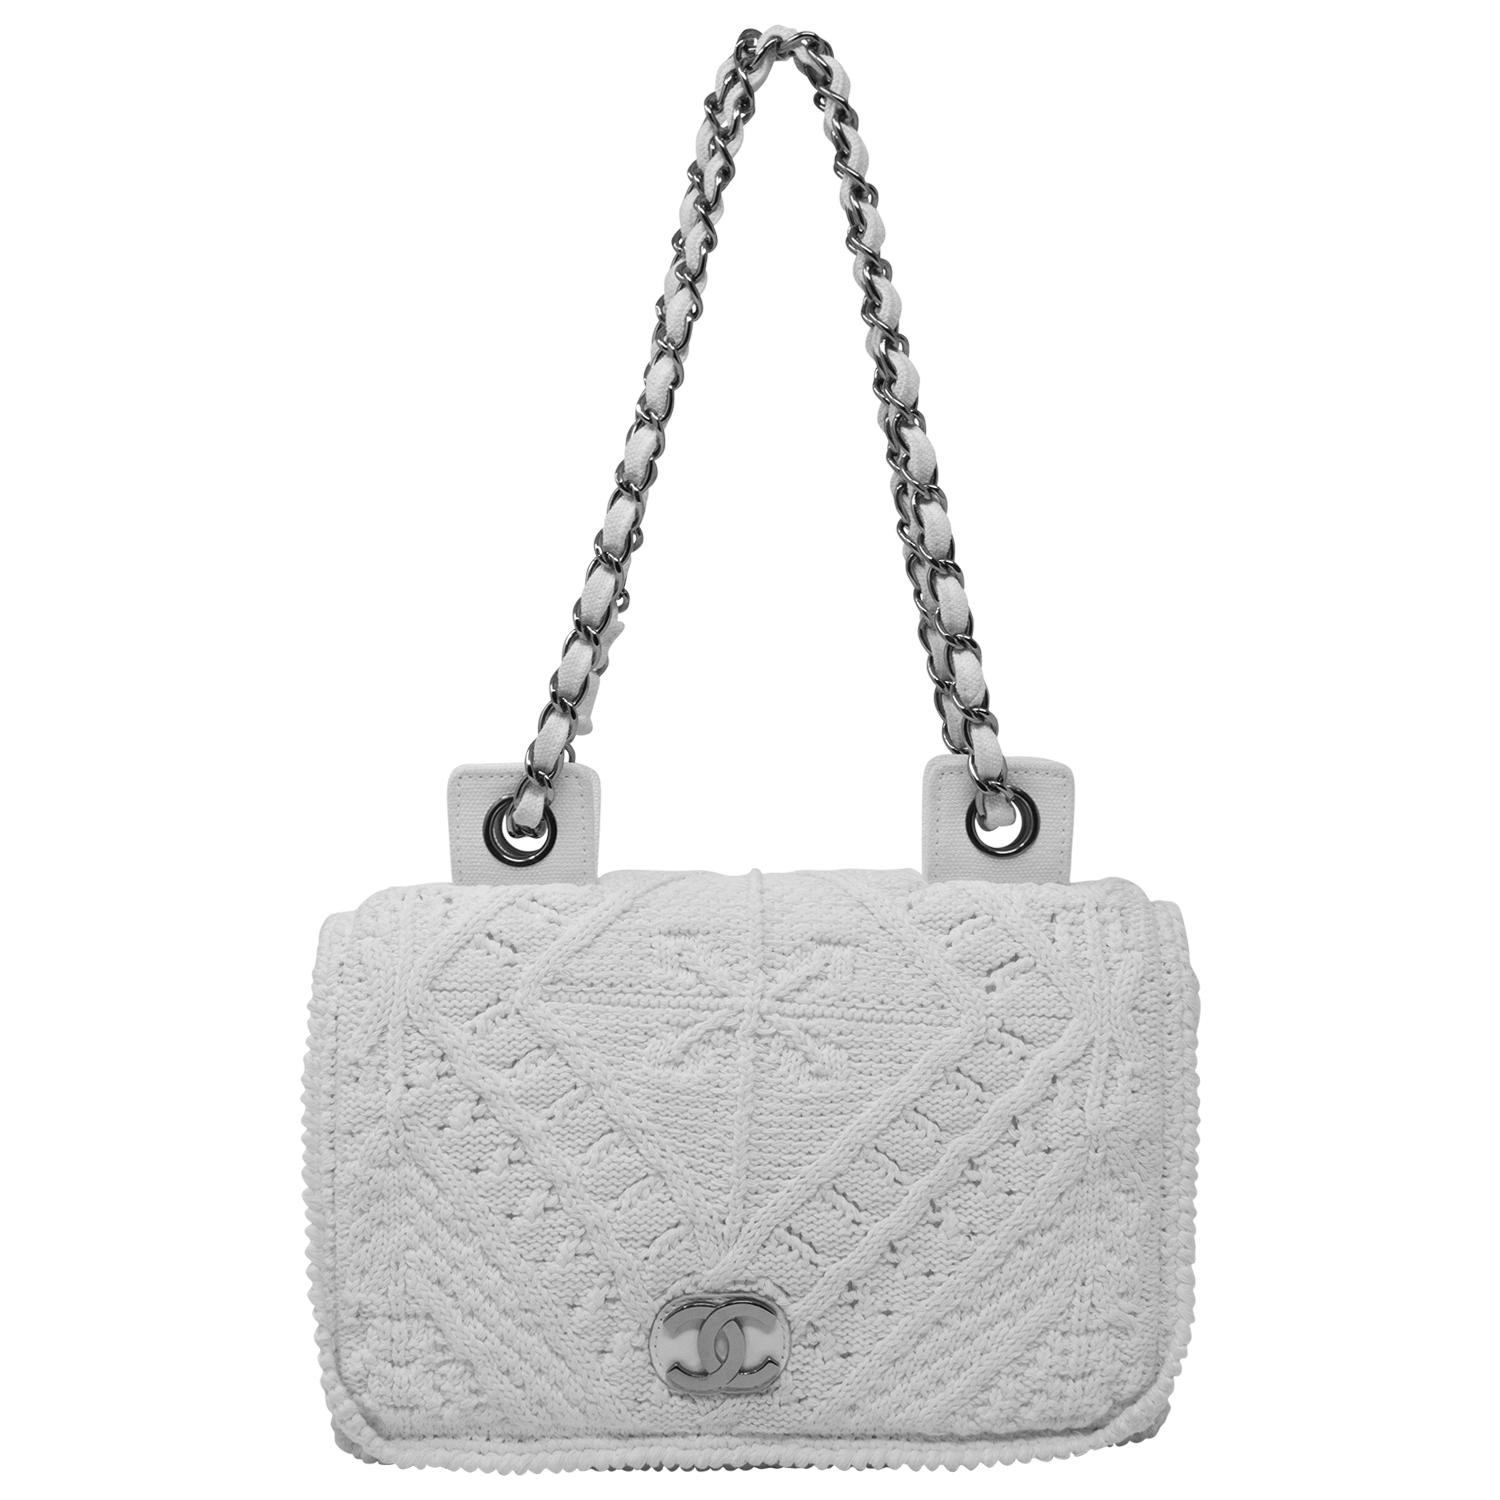 chanel black and white quilted purse